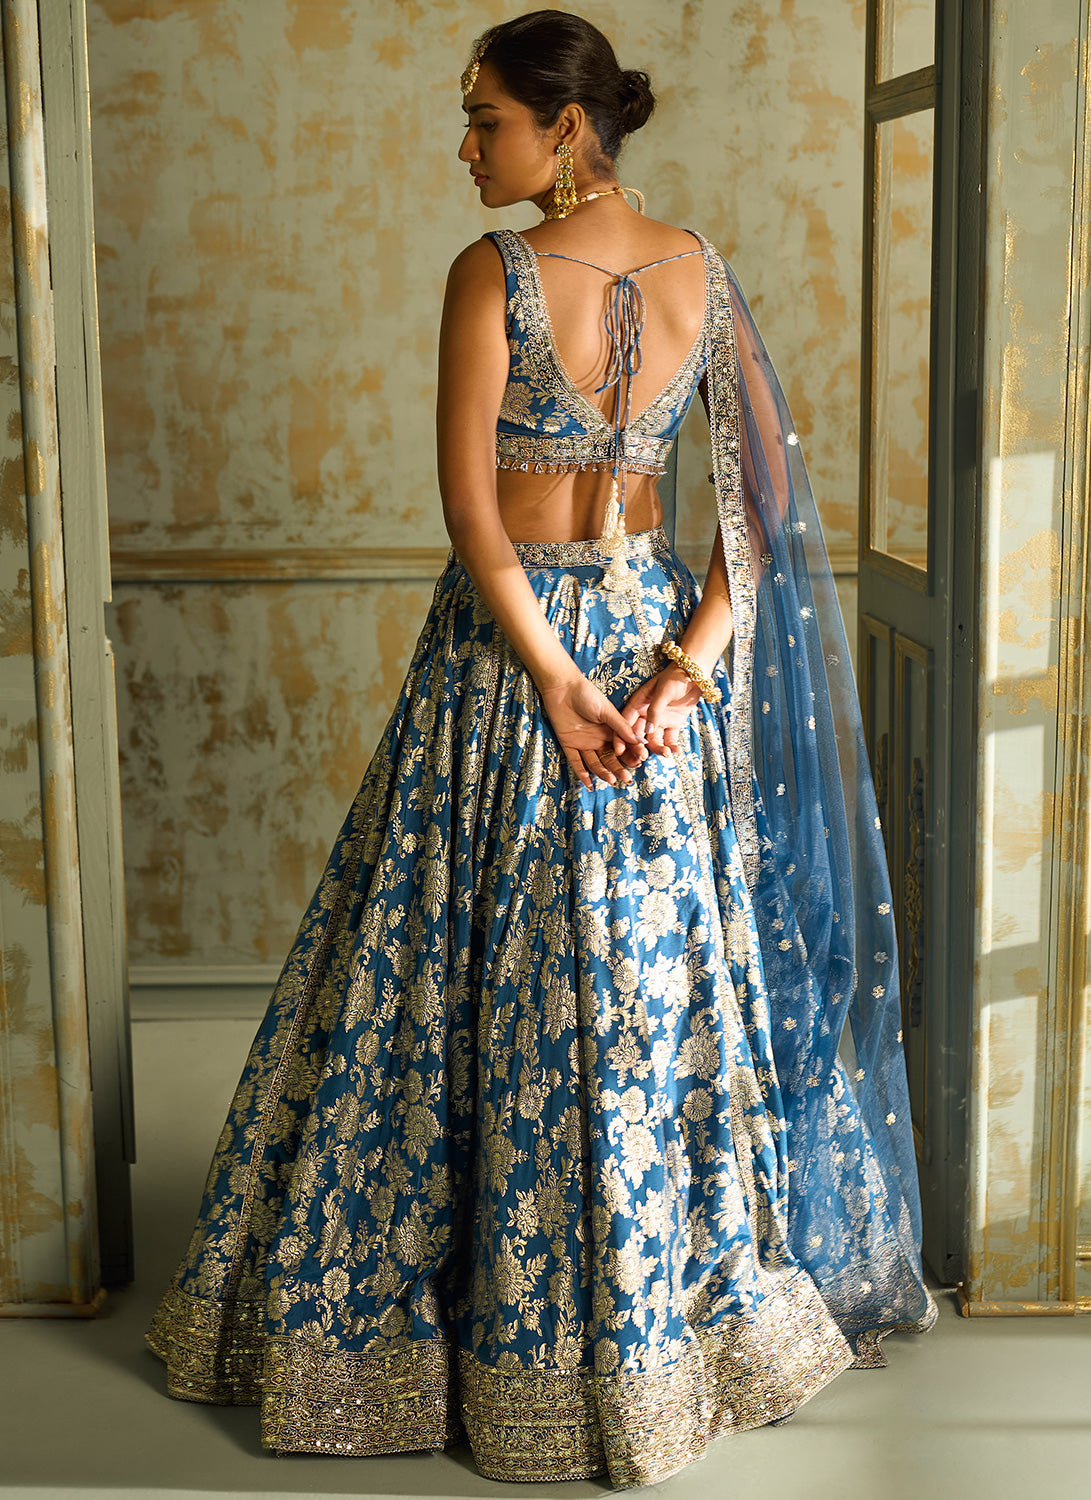 31 Brocade Lehenga Ideas For Brides Who Want To Dress To Impress | Brocade  lehenga, Lehenga designs, Lehenga